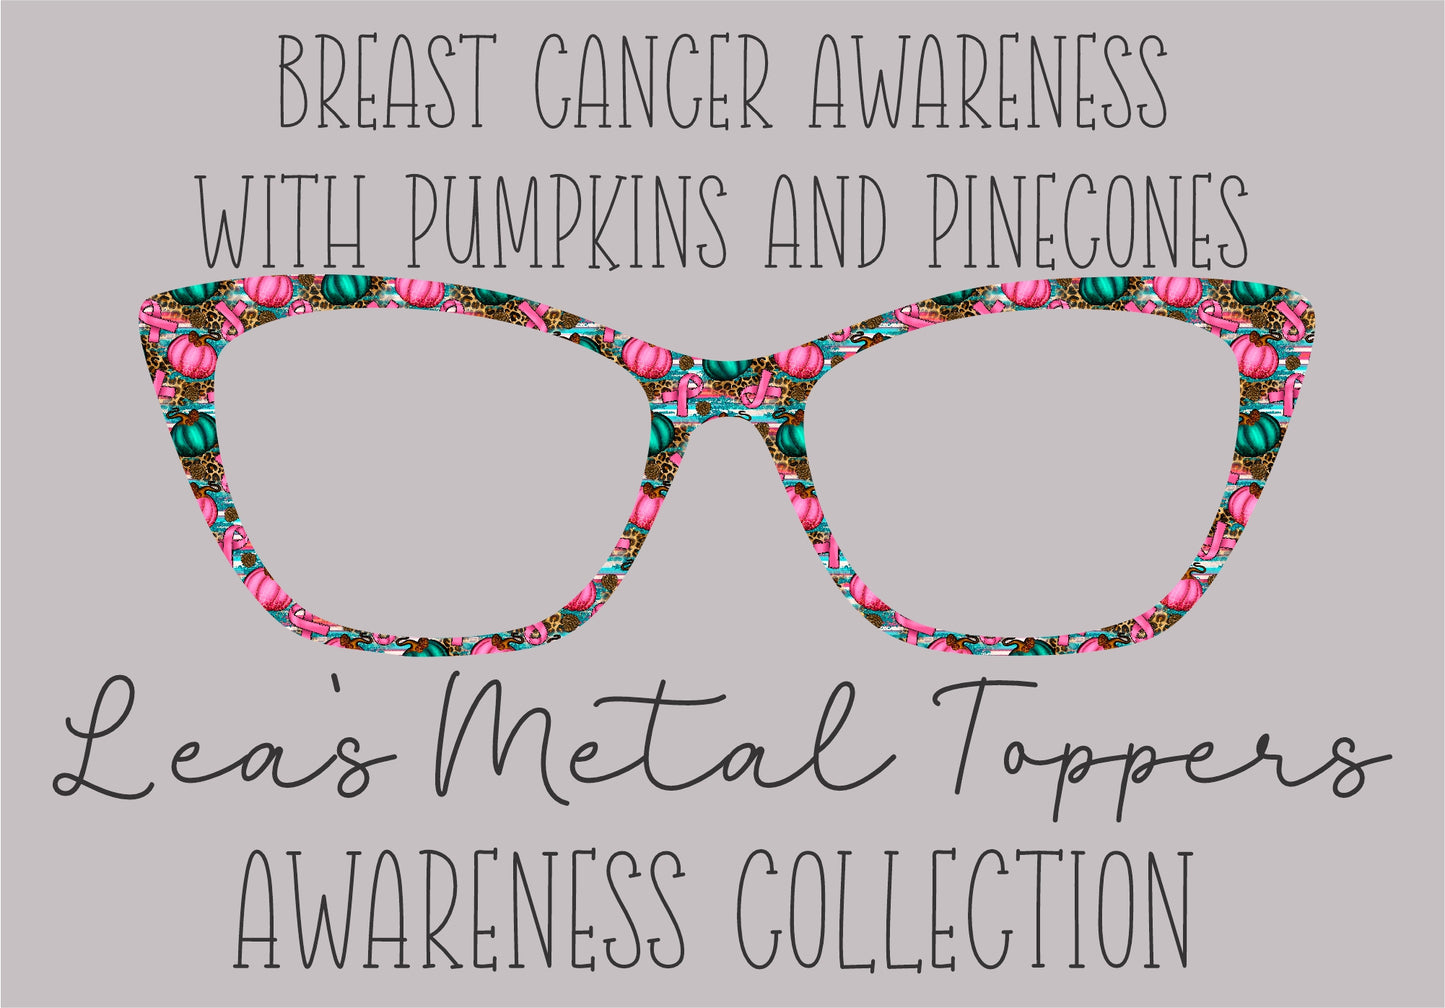 BREAST CANCER AWARENESS WITH PUMPKINS AND PINECONES Eyewear Frame Toppers COMES WITH MAGNETS